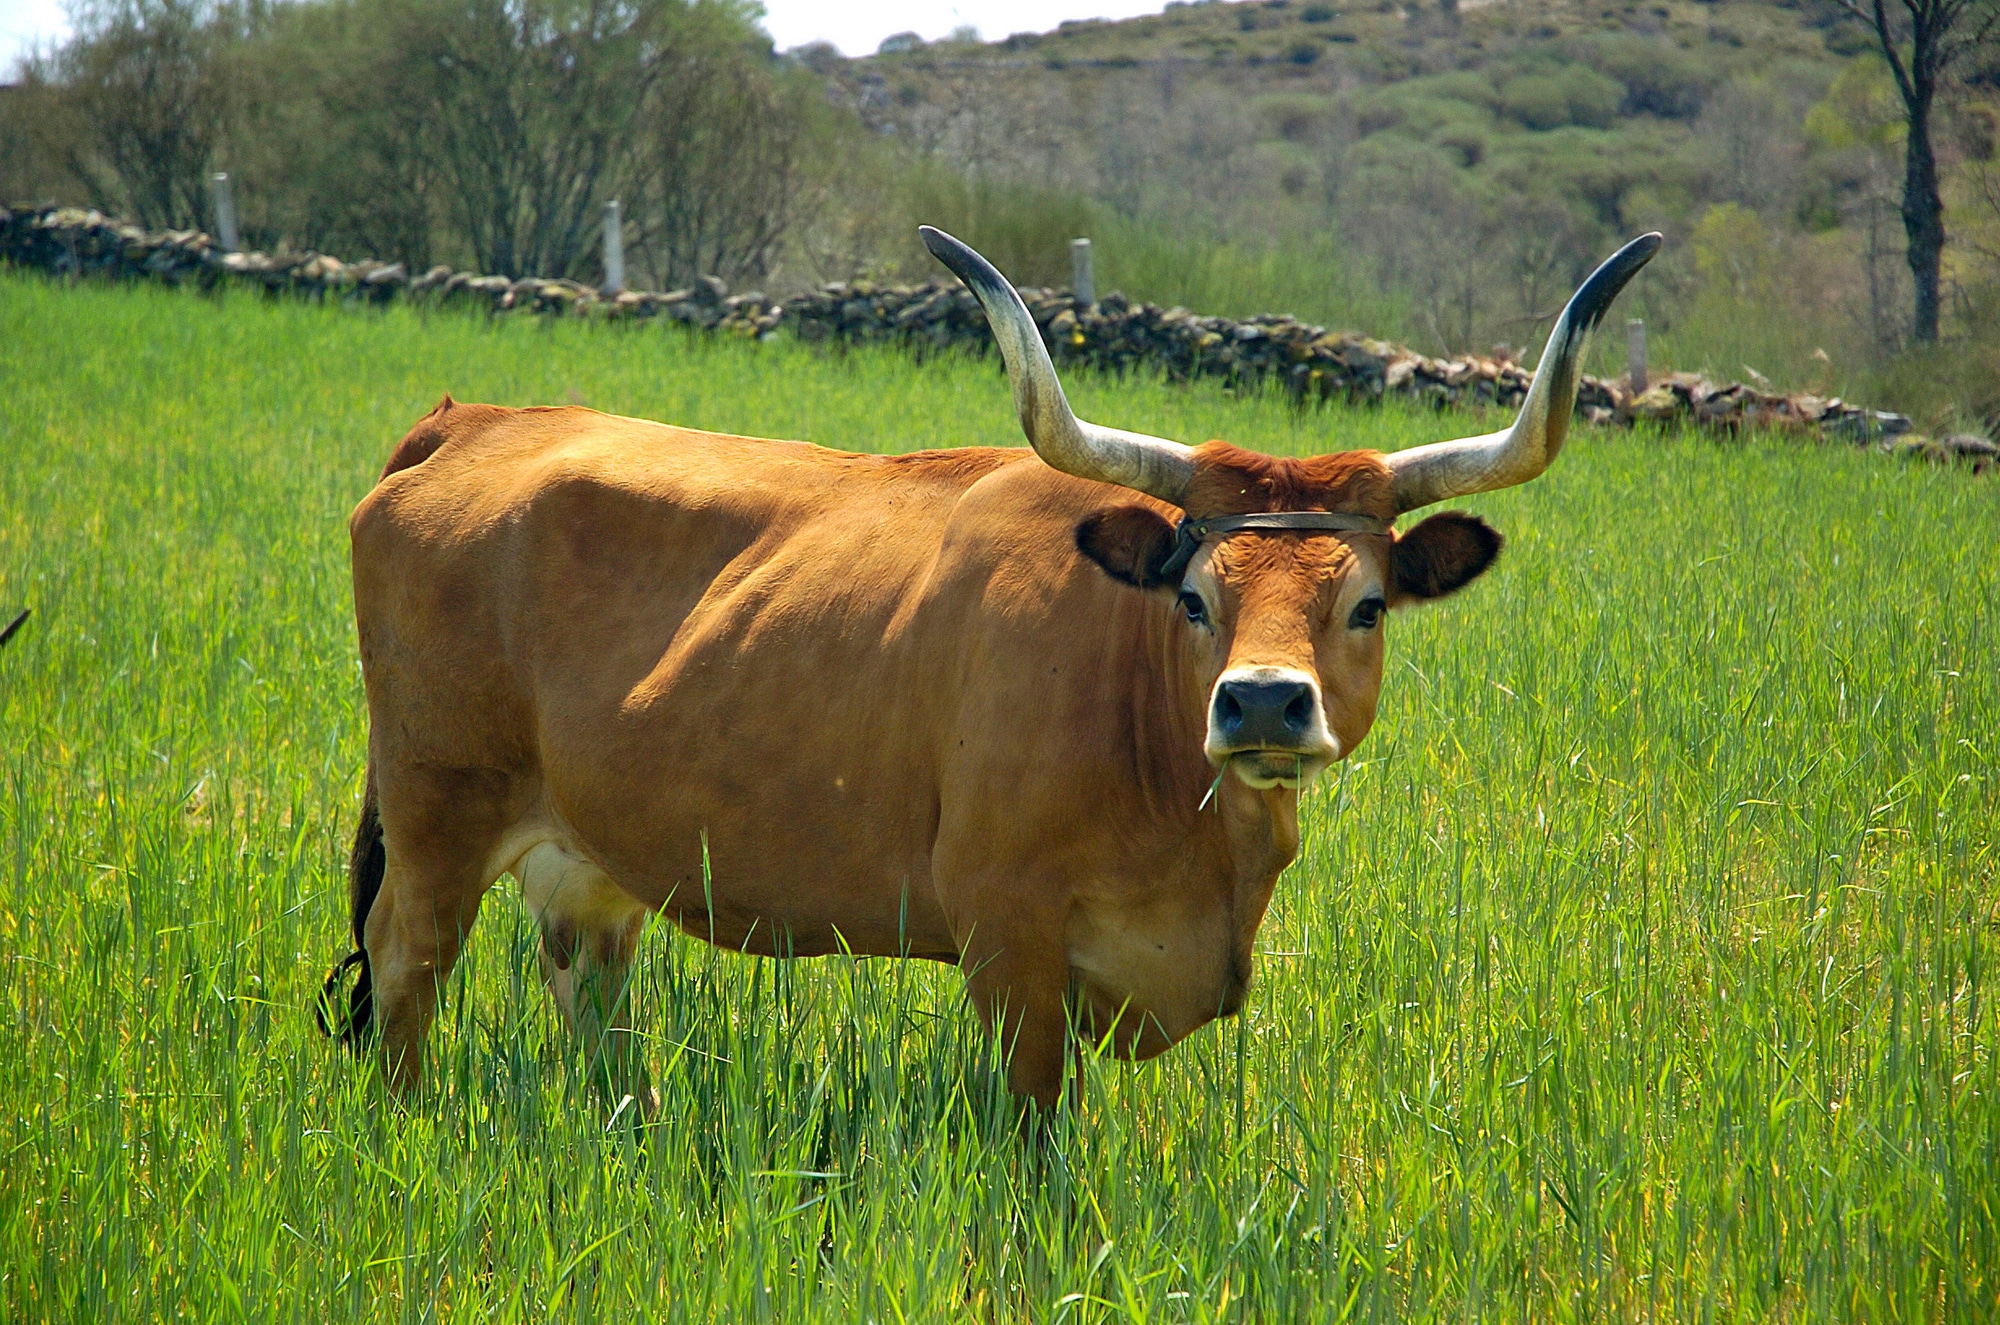 tawny ox with long horns stands in a verdant field